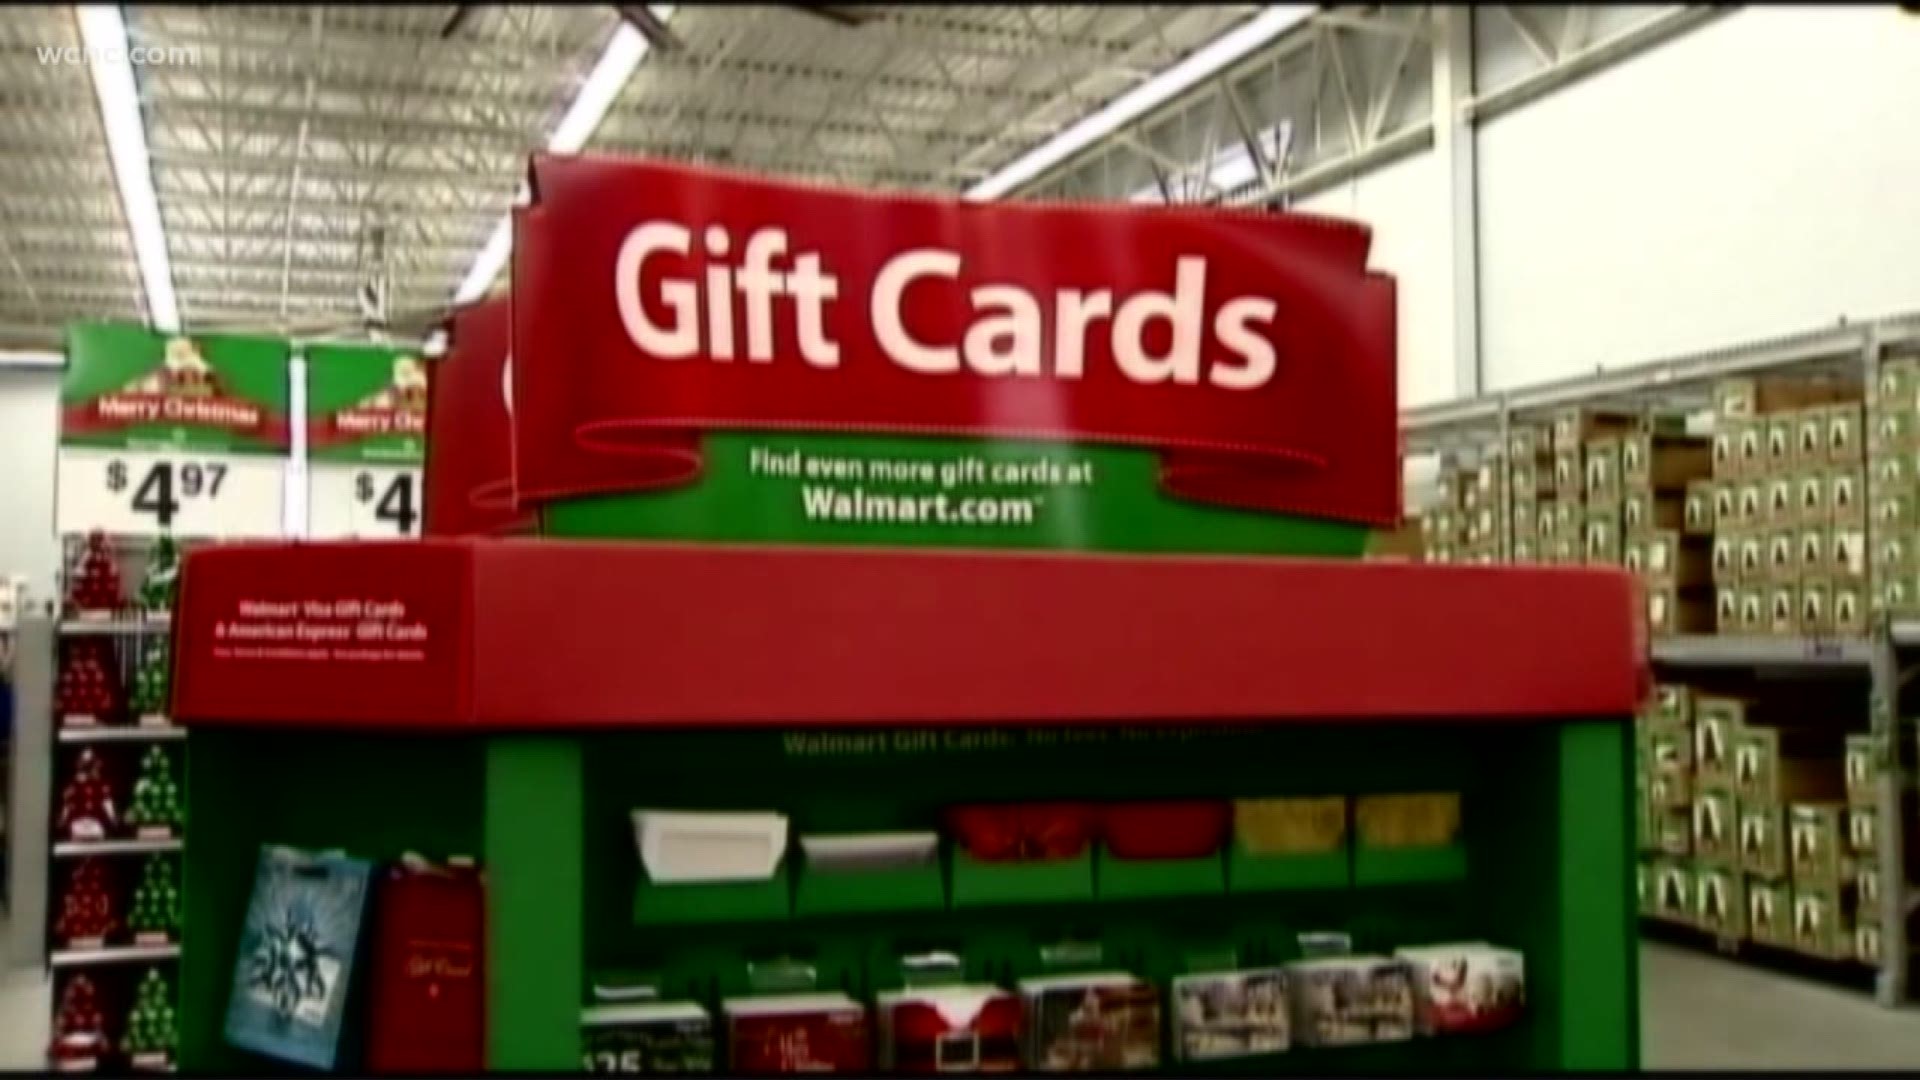 A warning if you bought gift cards as a present this year.